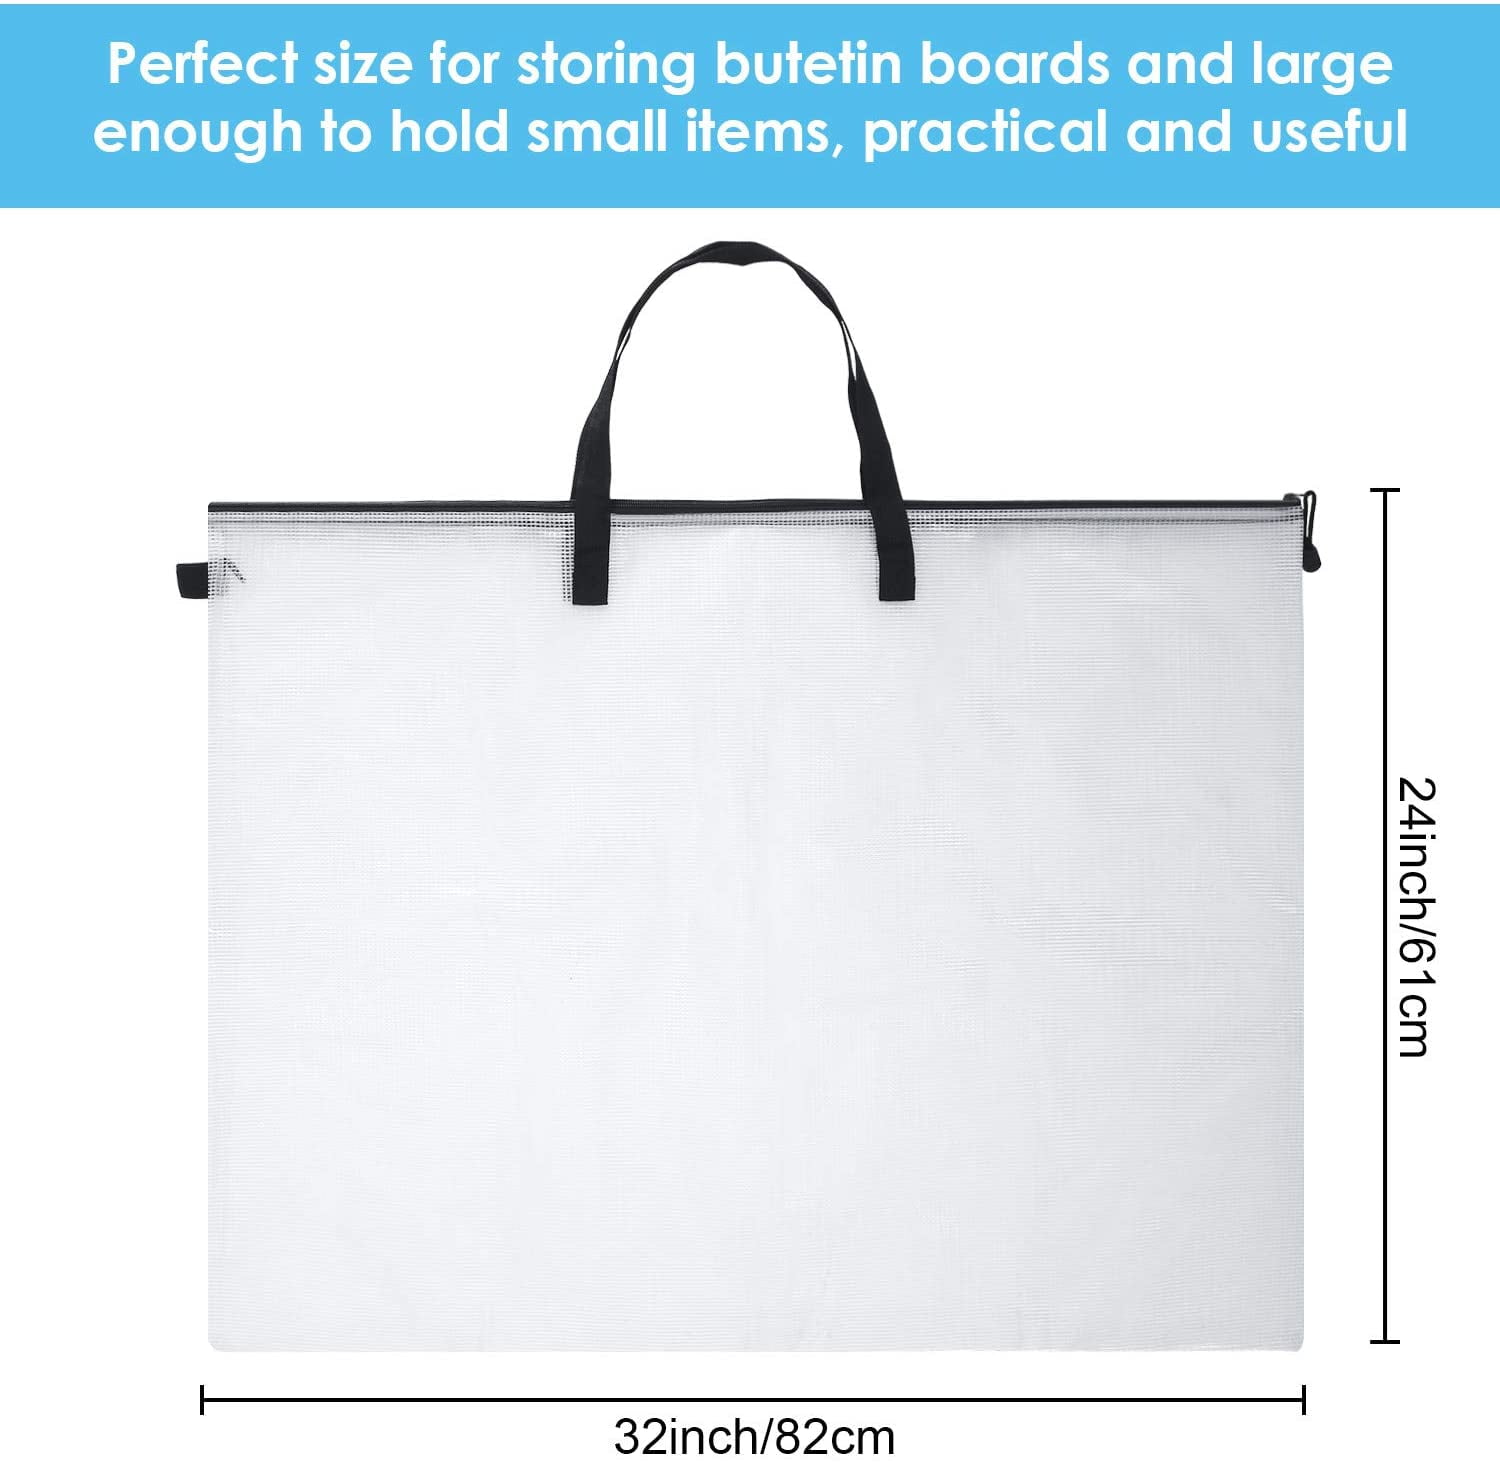 Artworks Opret 2 Pcs 19 x 25 inch Vinyl Storage Bags with Zipper and Handle Posters Organizer Transparent Bag for Bulletin Boards Art Portfolio Bag Charts and Teaching Material 